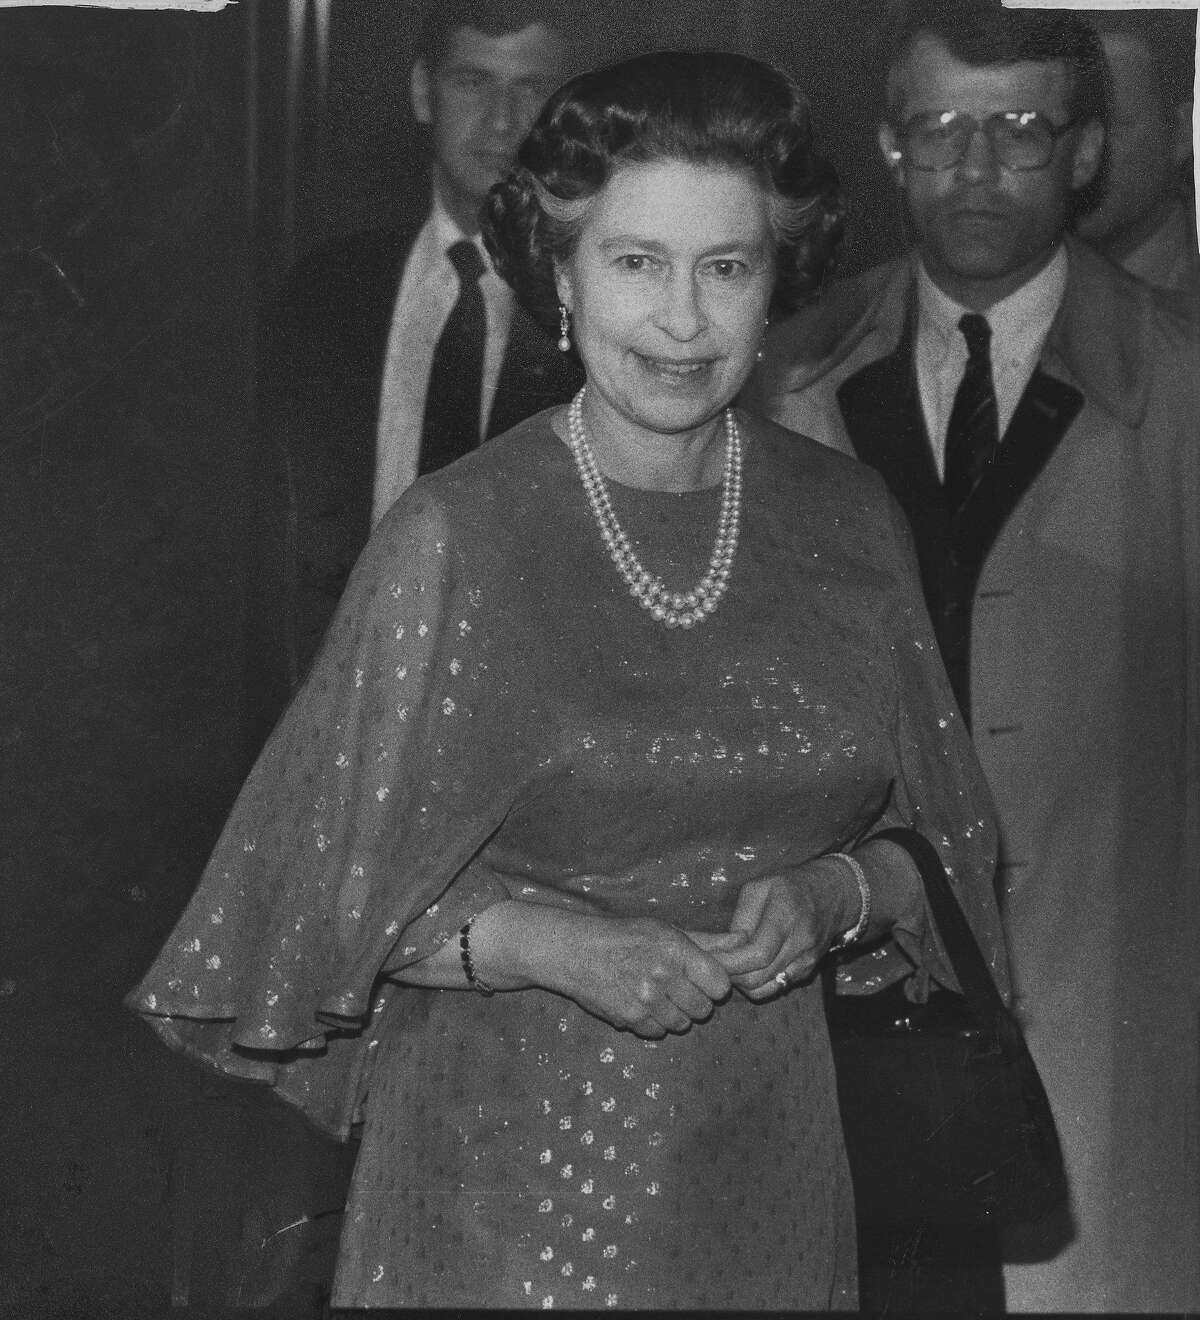 Queen Elizabeth II of Great Britain visits San Francisco. She is seen here in the St Francis Hotel lobby, on their way to dinner, March 2, 1983 Photo ran 03/03/1983, p. 13